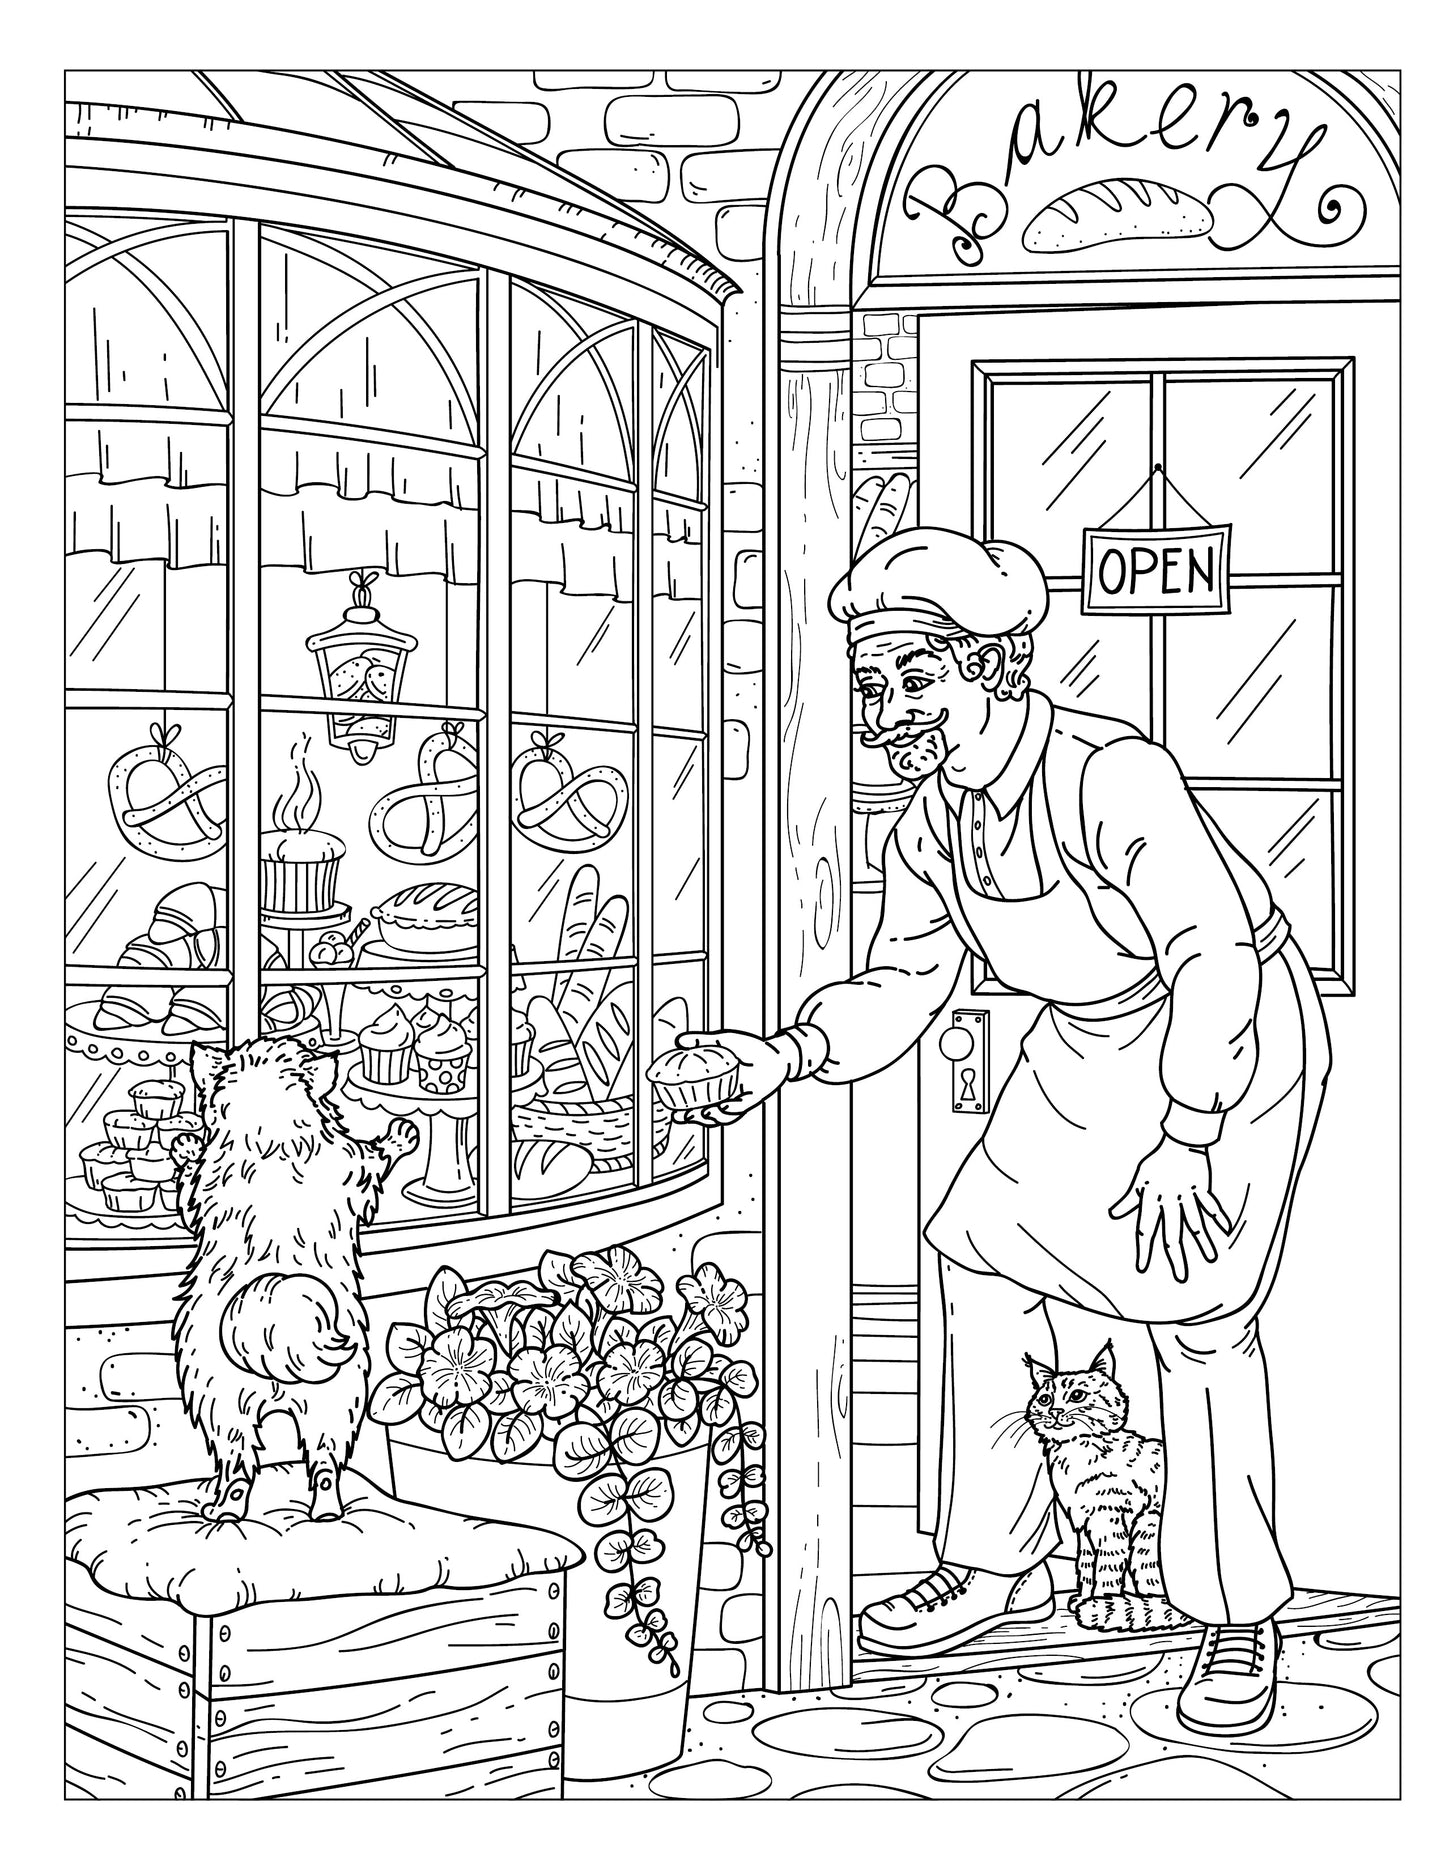 Single Coloring Book Page - Winston & Whiskers, Adventure One - At the Baker's